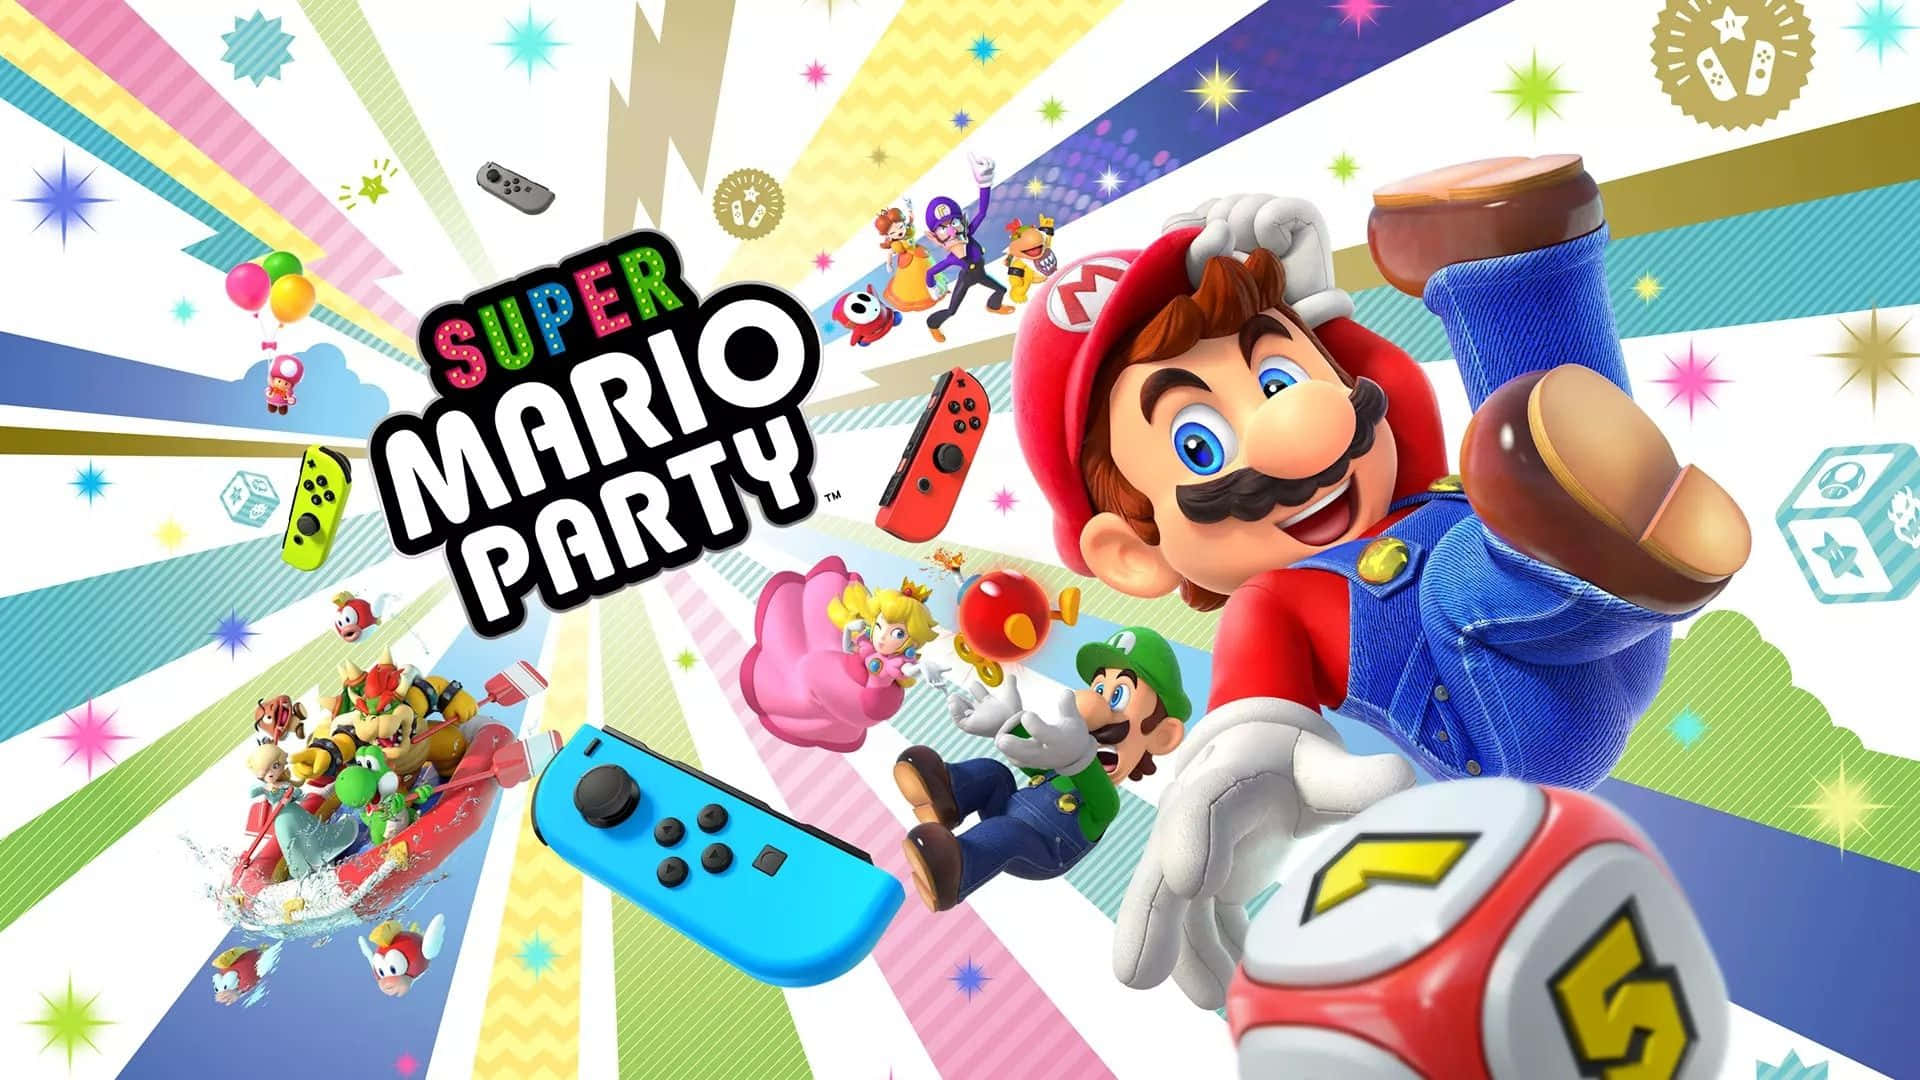 Exciting Mario Party Characters in Action Wallpaper